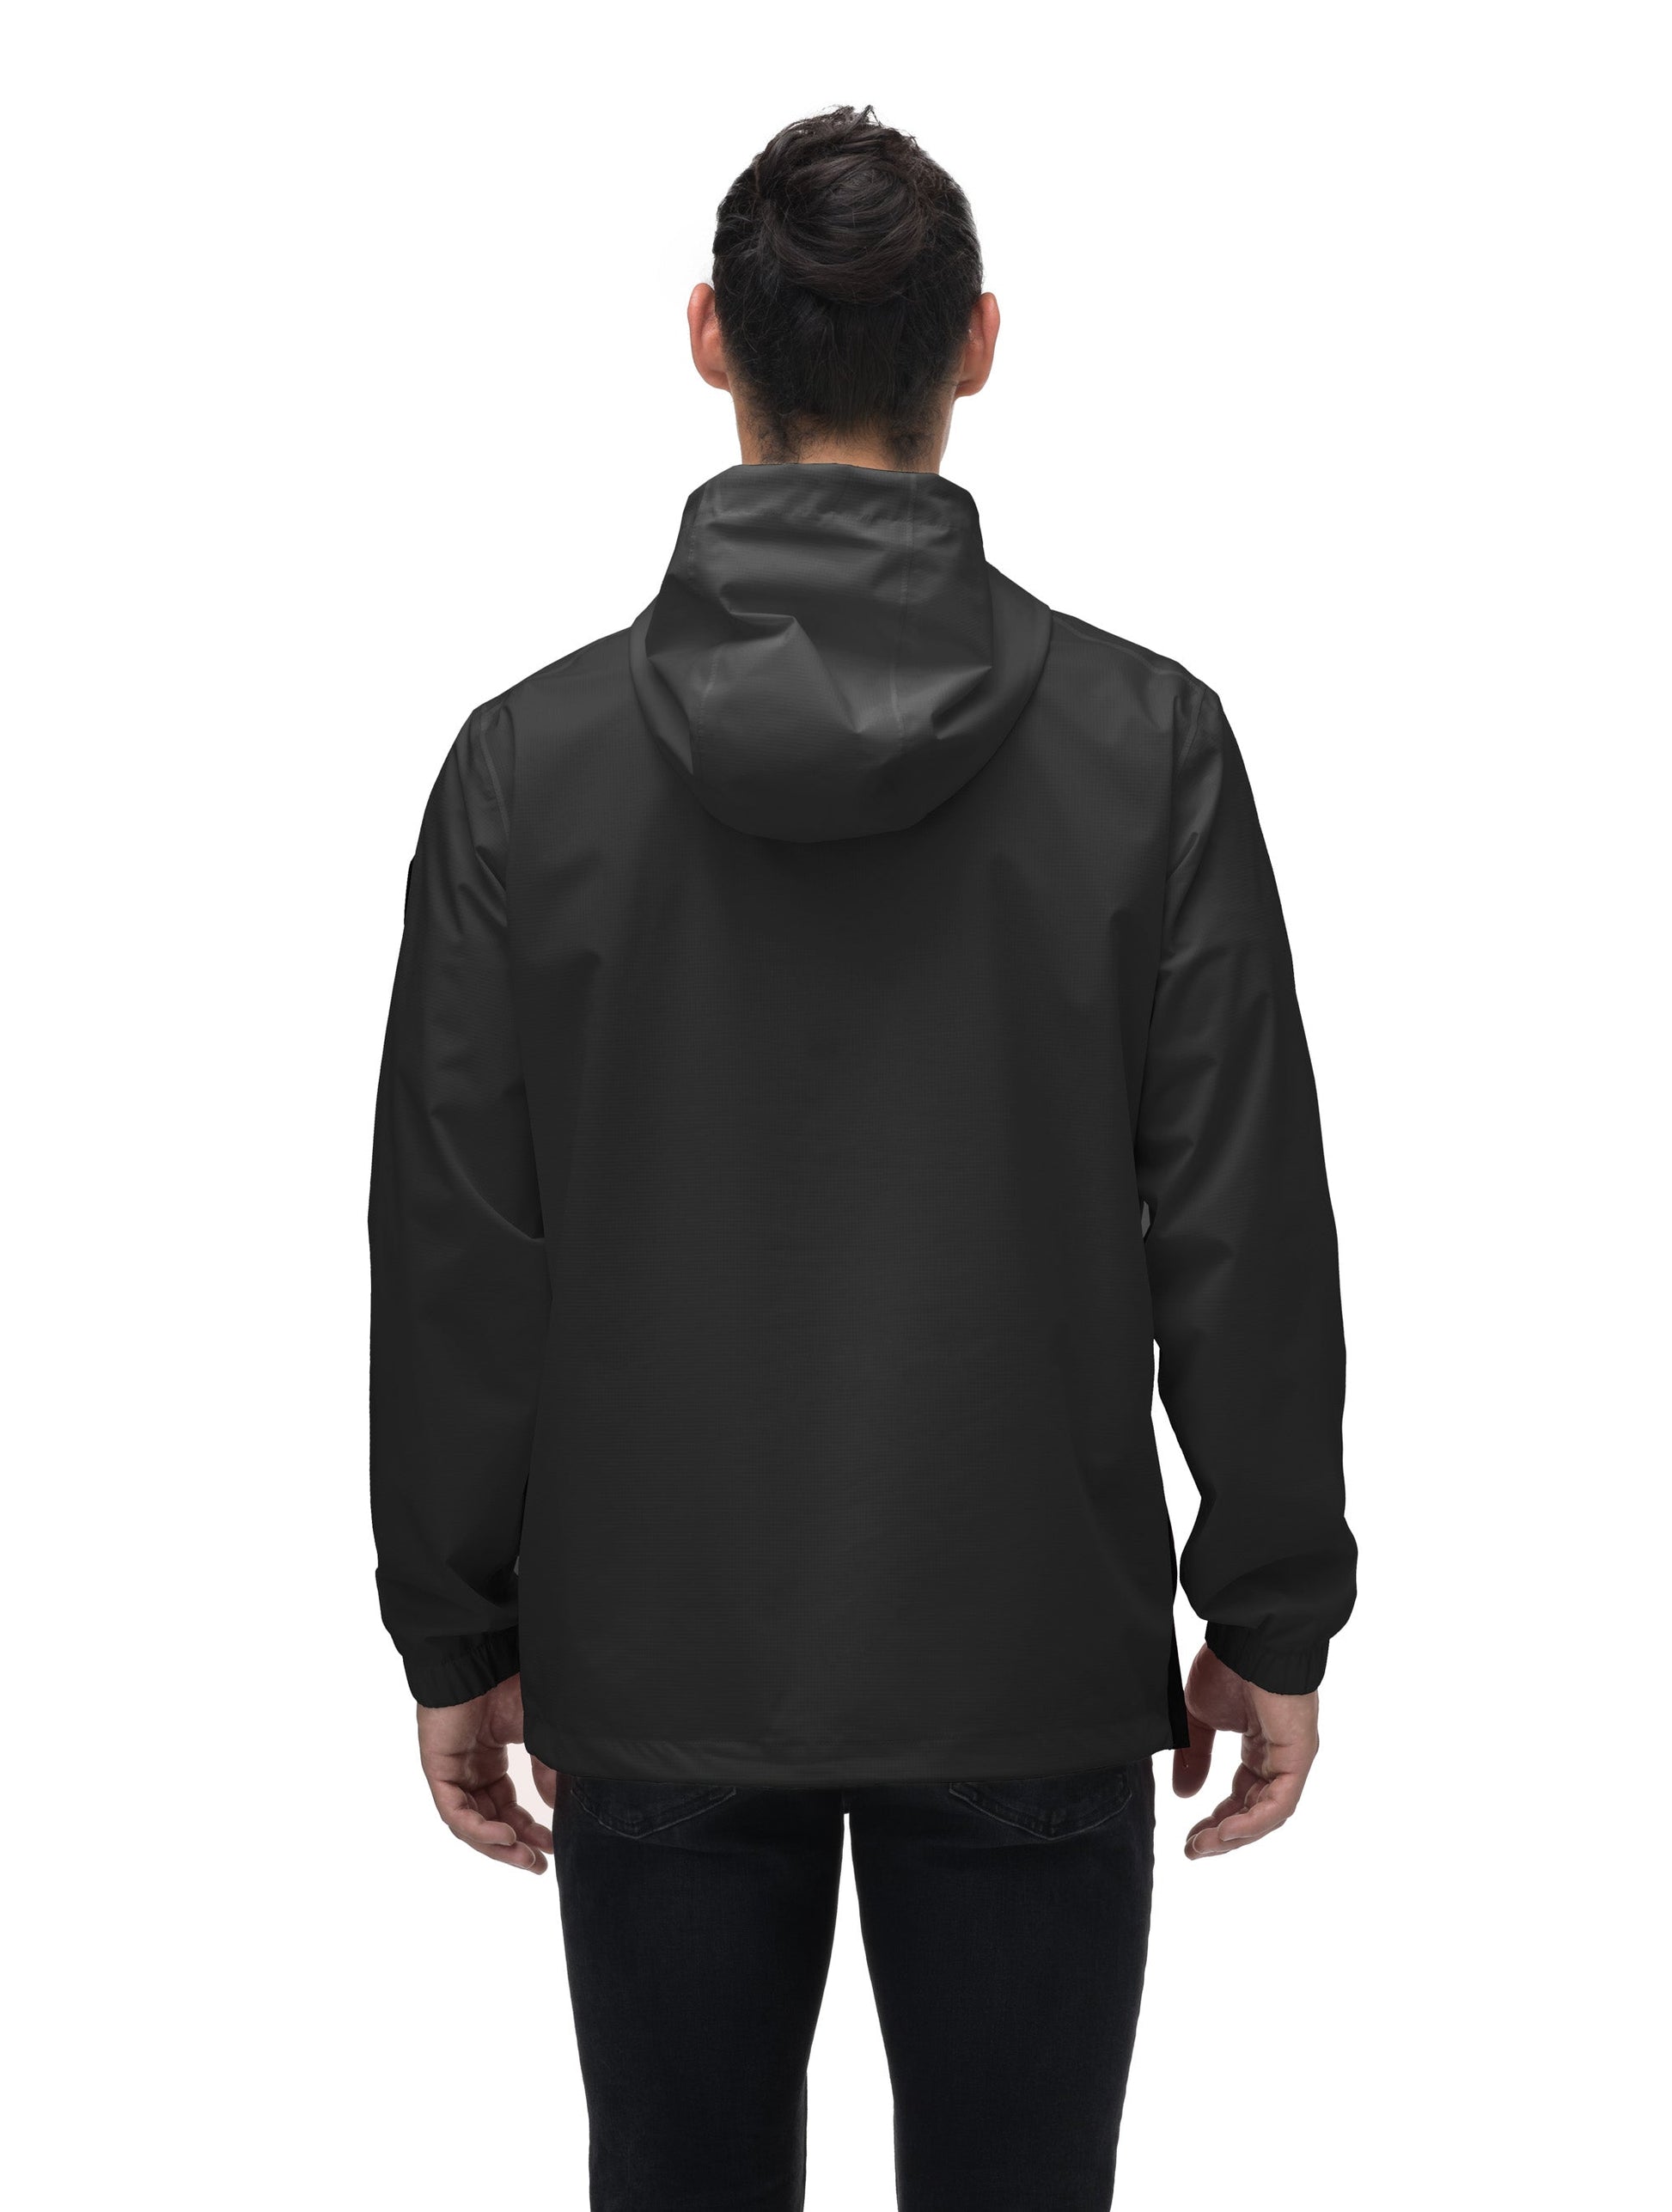 Men's hip length hooded pullover anorak with zipper at collar in Black